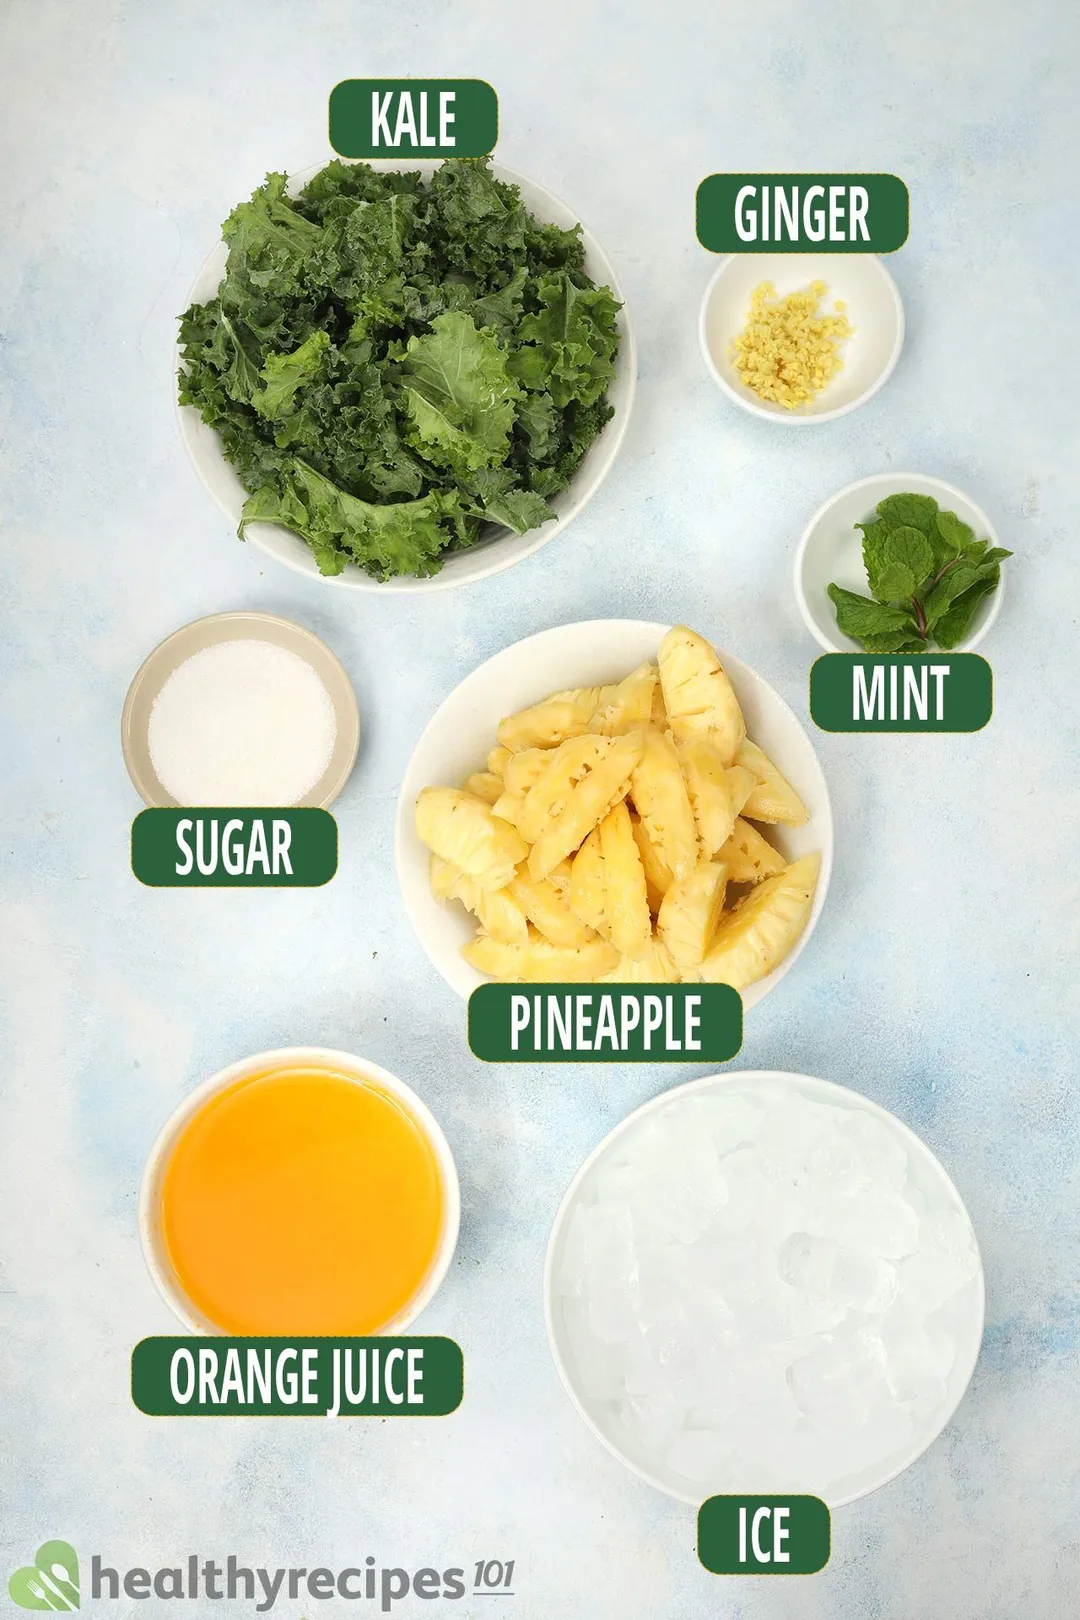 Ingredients for Pineapple Kale Smoothie, including bowls of kale, pineapple slices, and other smoothie essentials.